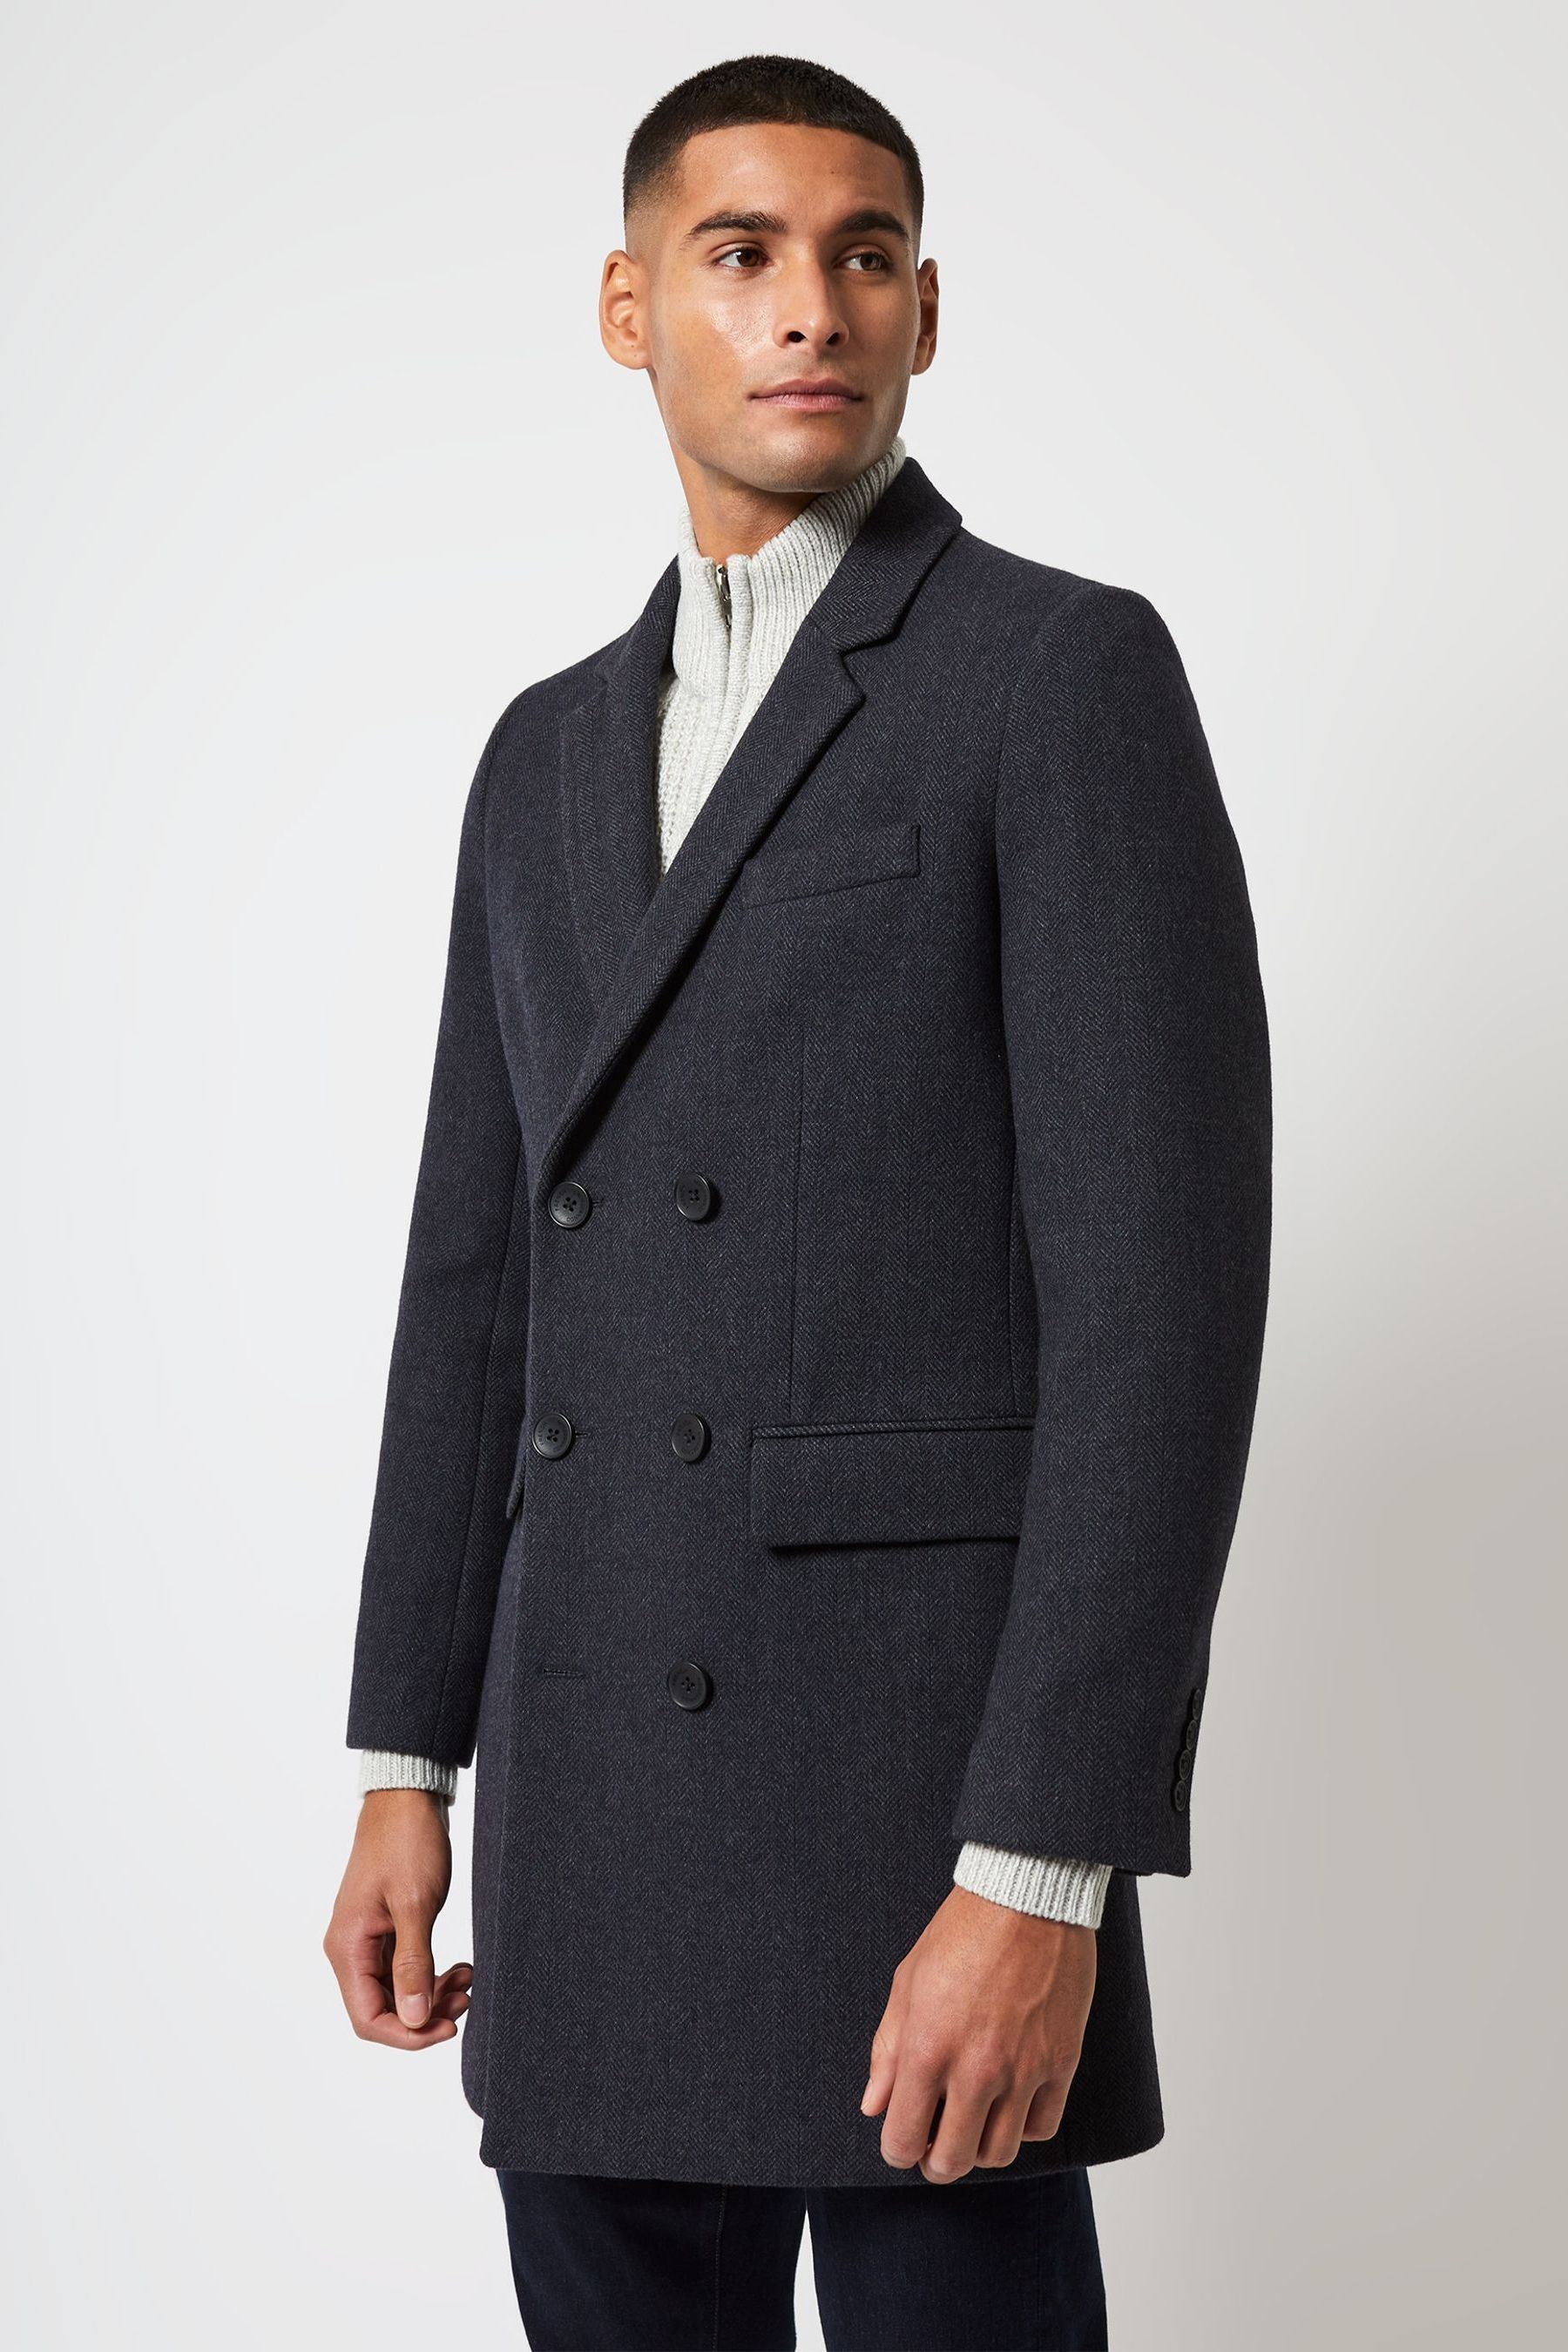 Buy French Connection Dark Blue Overcoat Herringbone Jacket from the ...